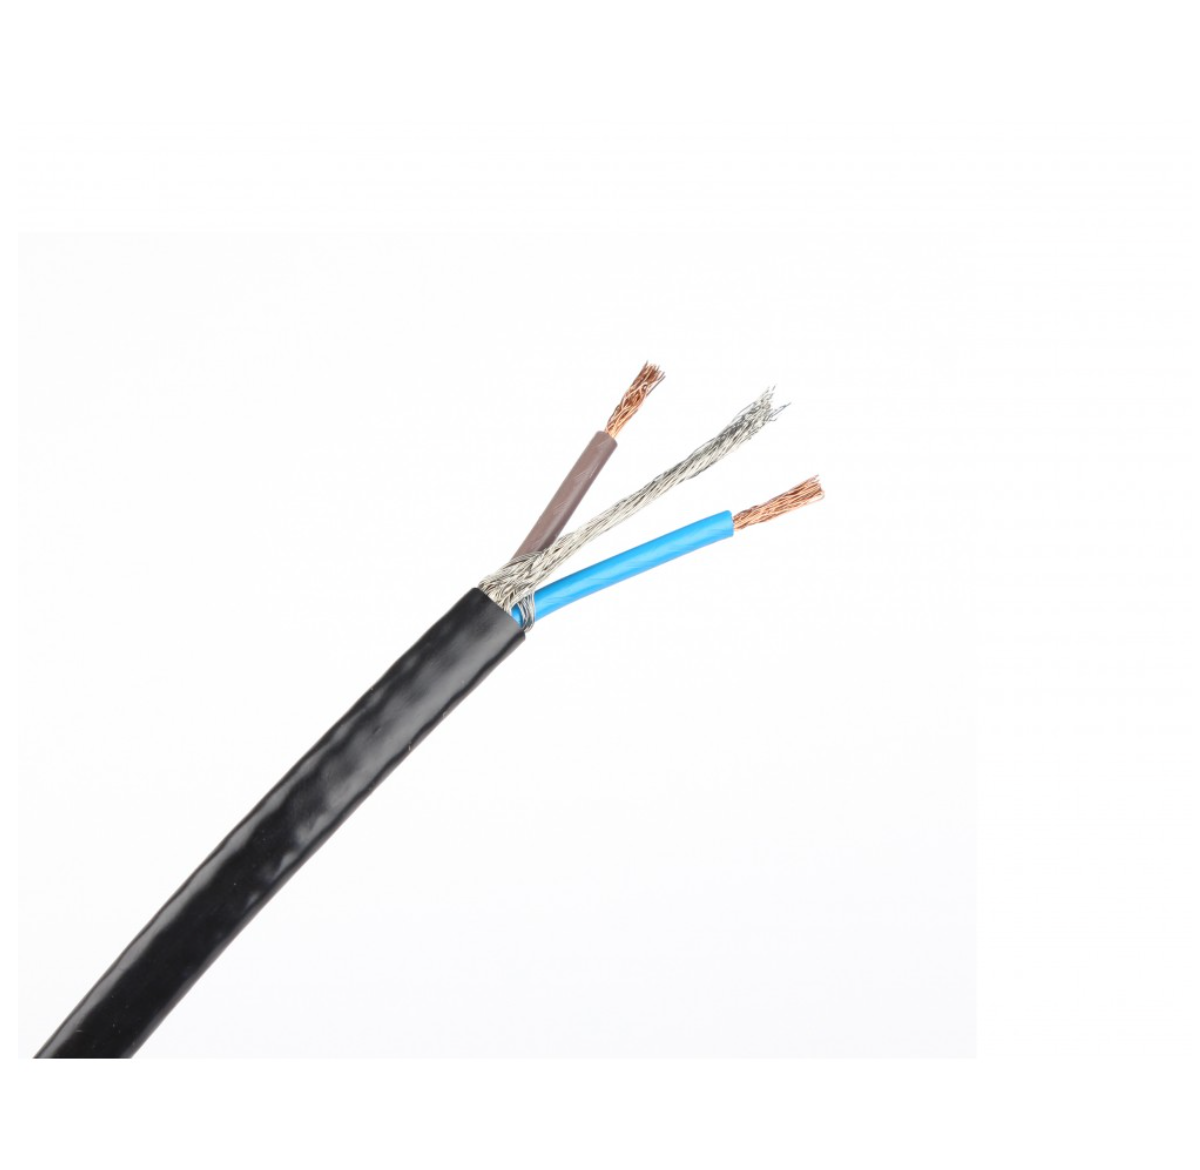 Heating cable - 80m